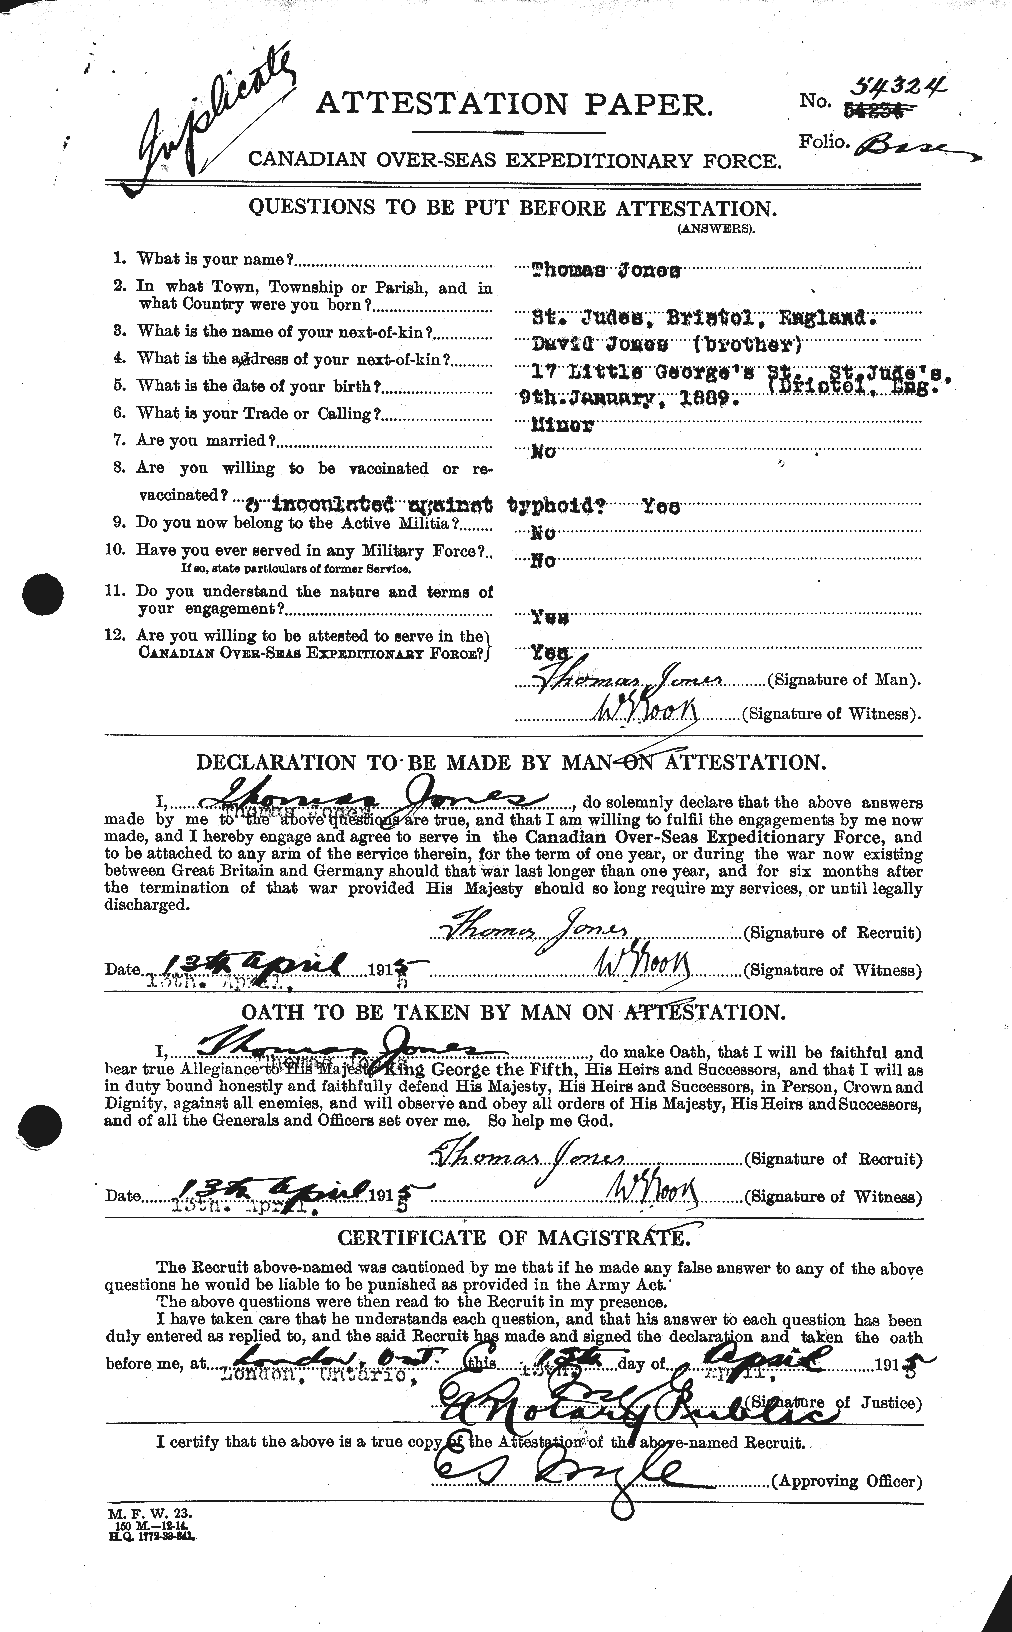 Personnel Records of the First World War - CEF 426597a